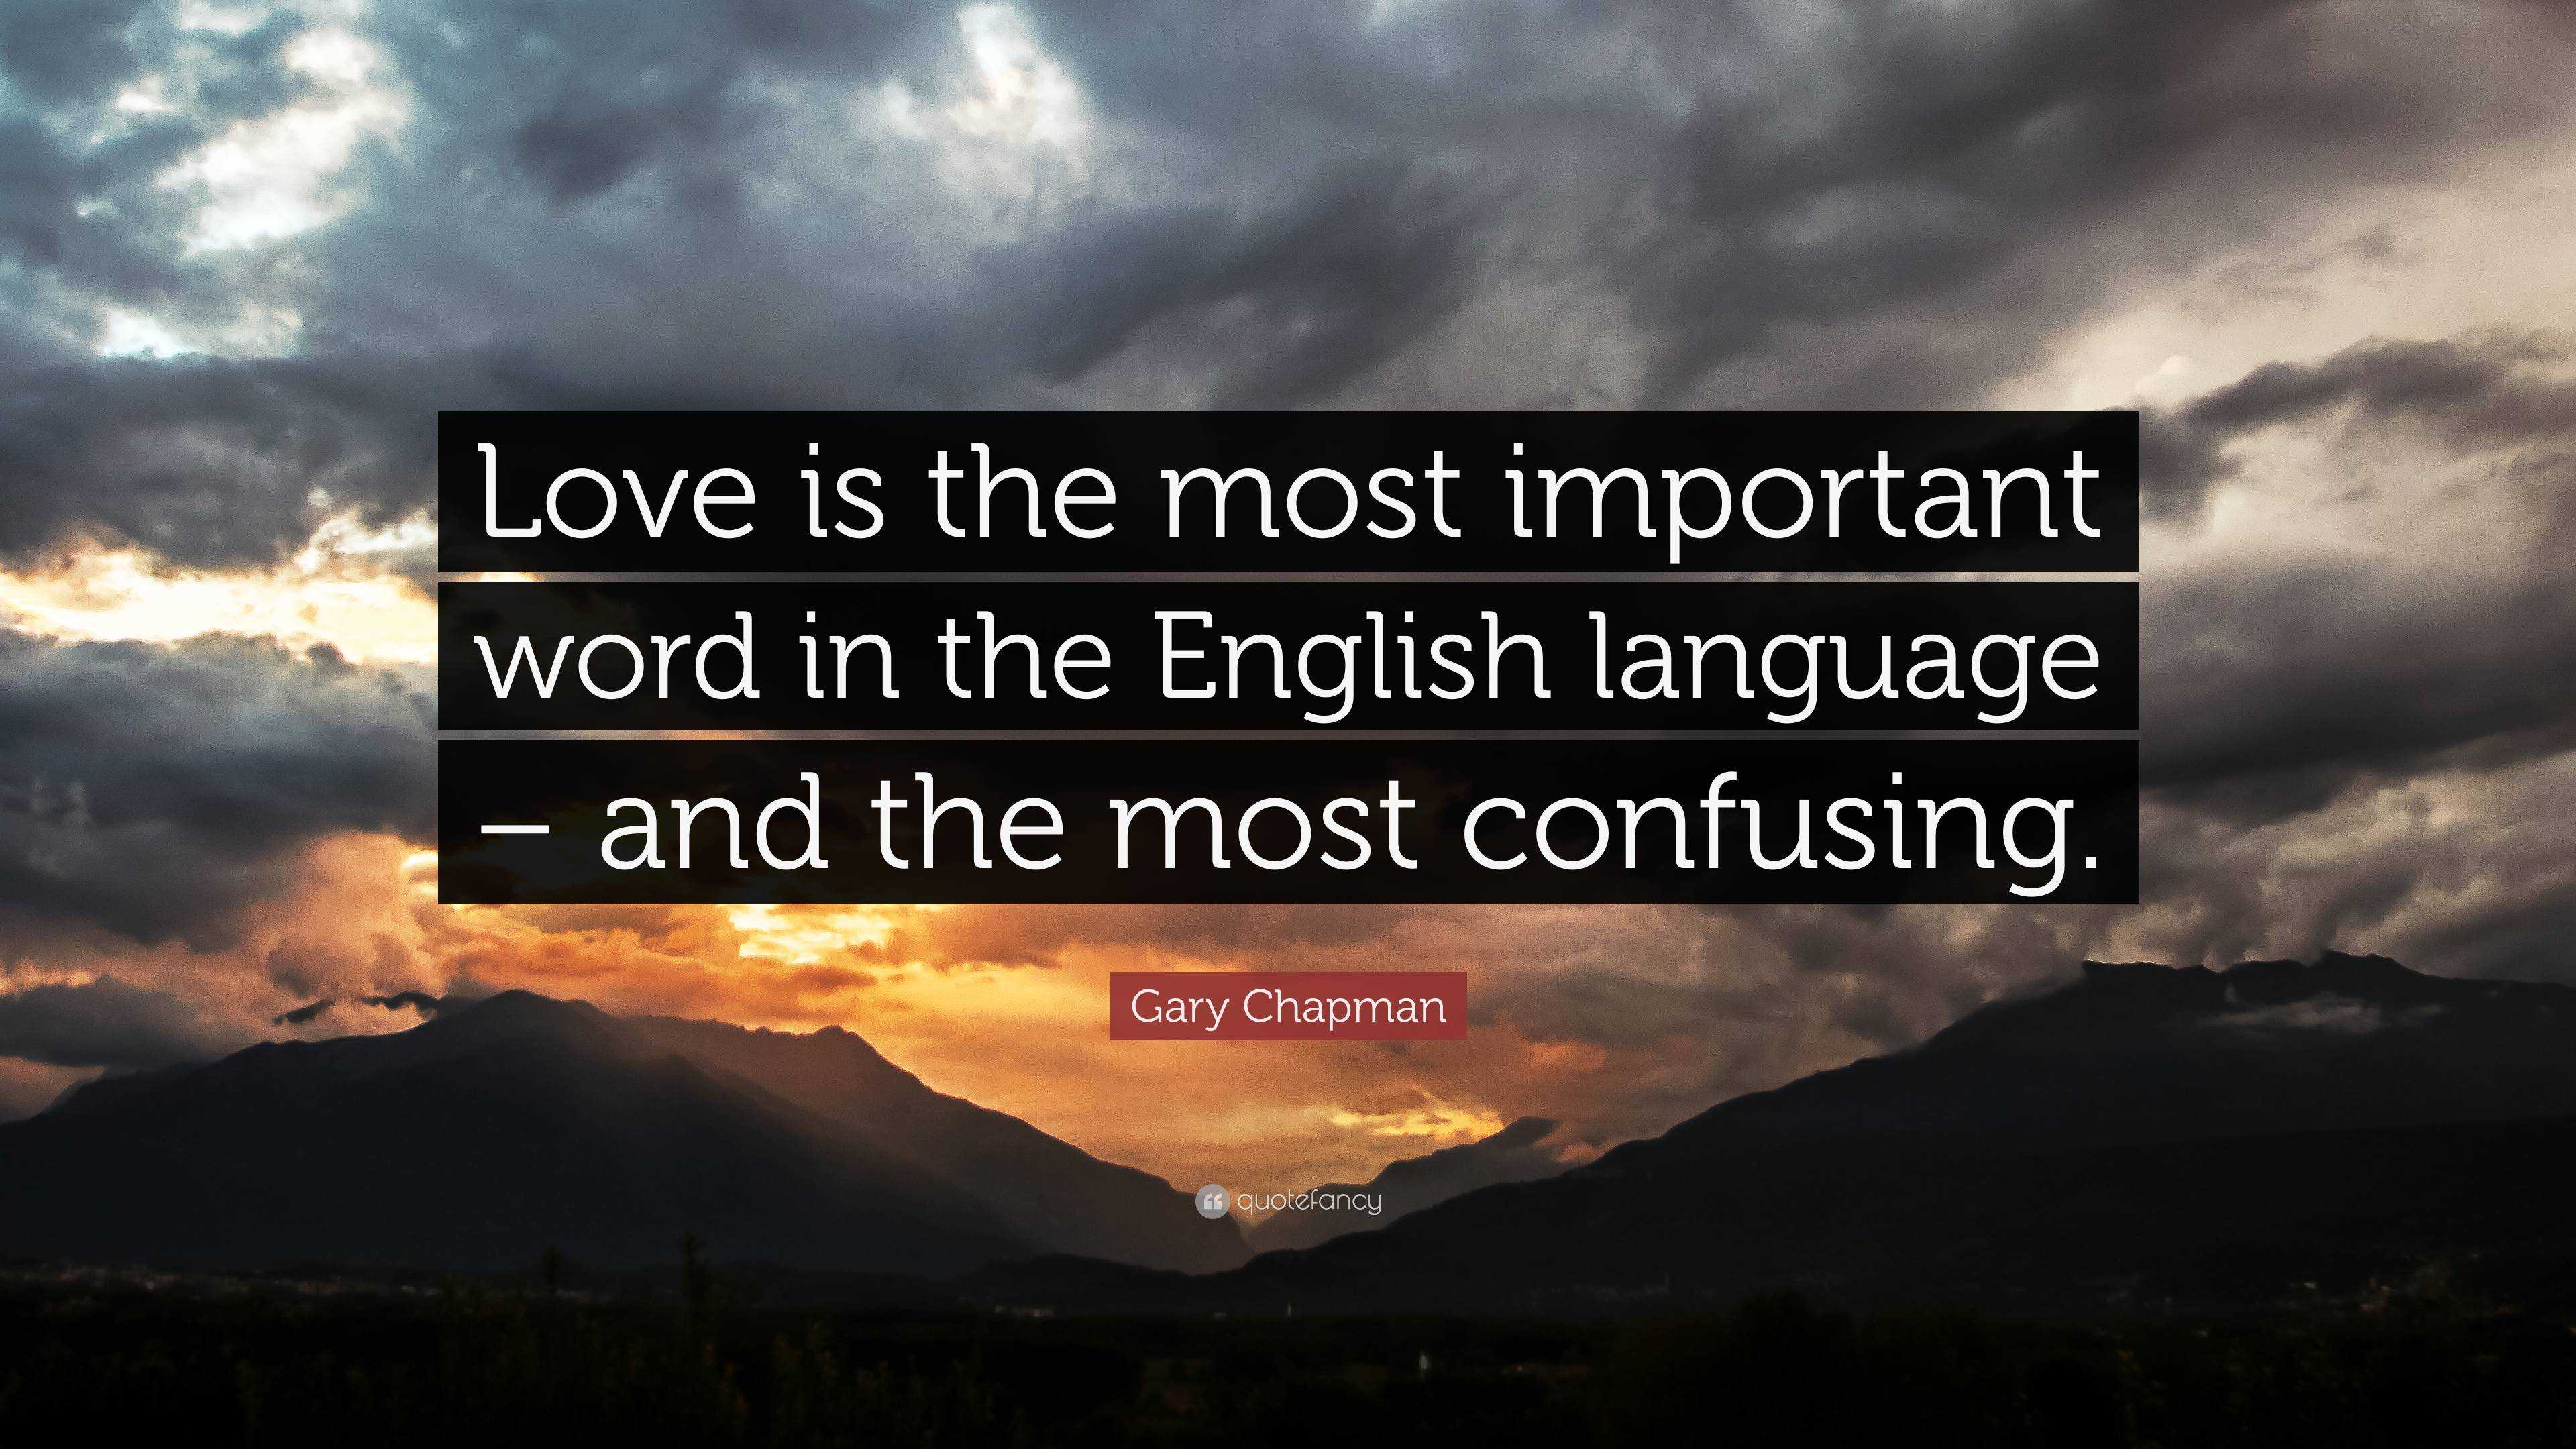 Gary Chapman Quote: “Love is the most important word in the English ...